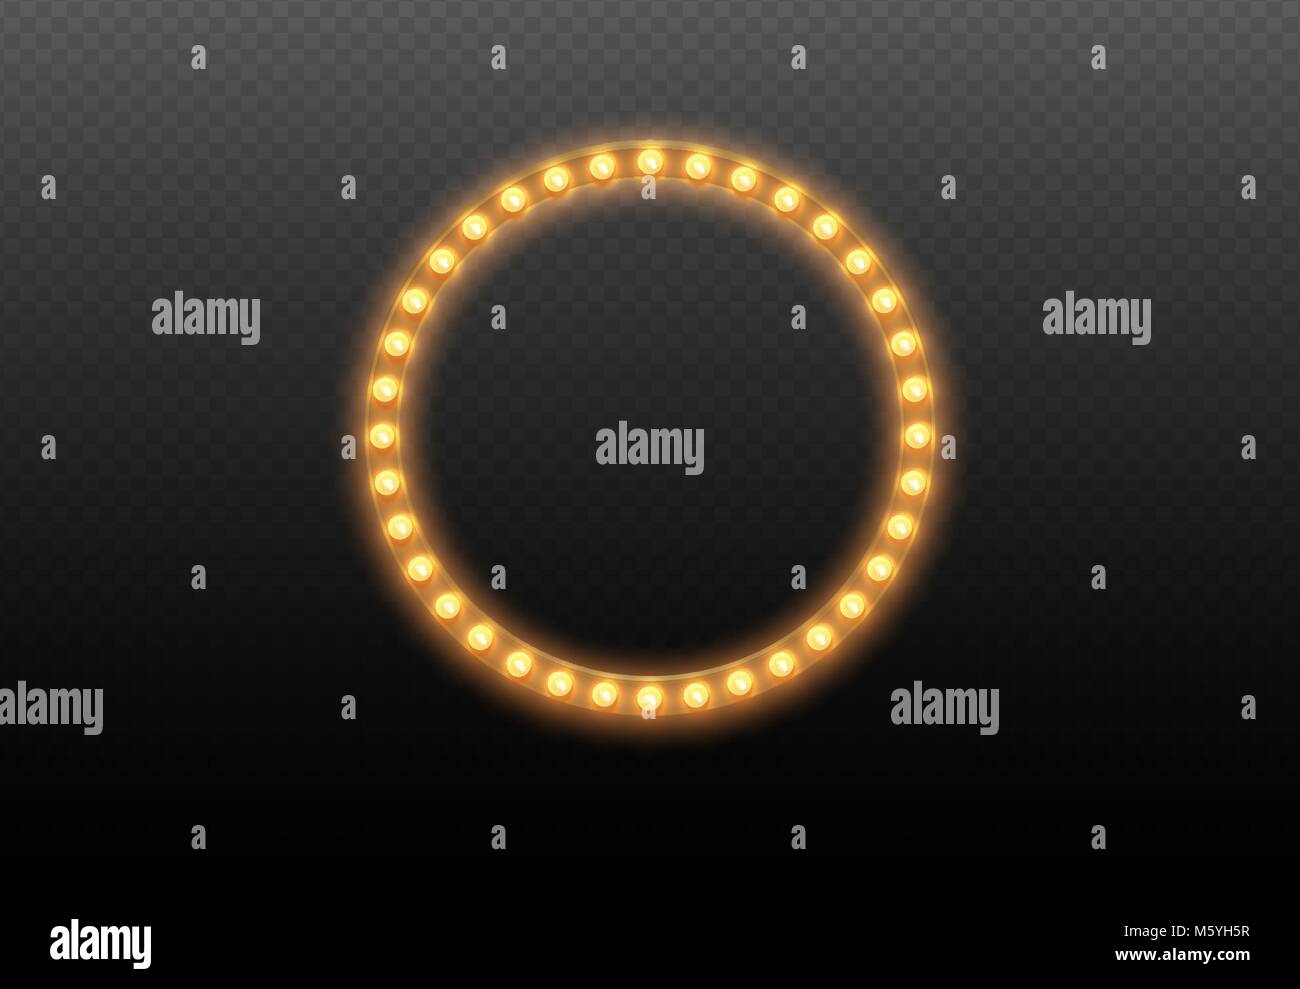 Light bulb circle. Round lights frame on transparent background. Illuminated round realistic casino banner with lamps isolated. Vector shiny Stock Vector